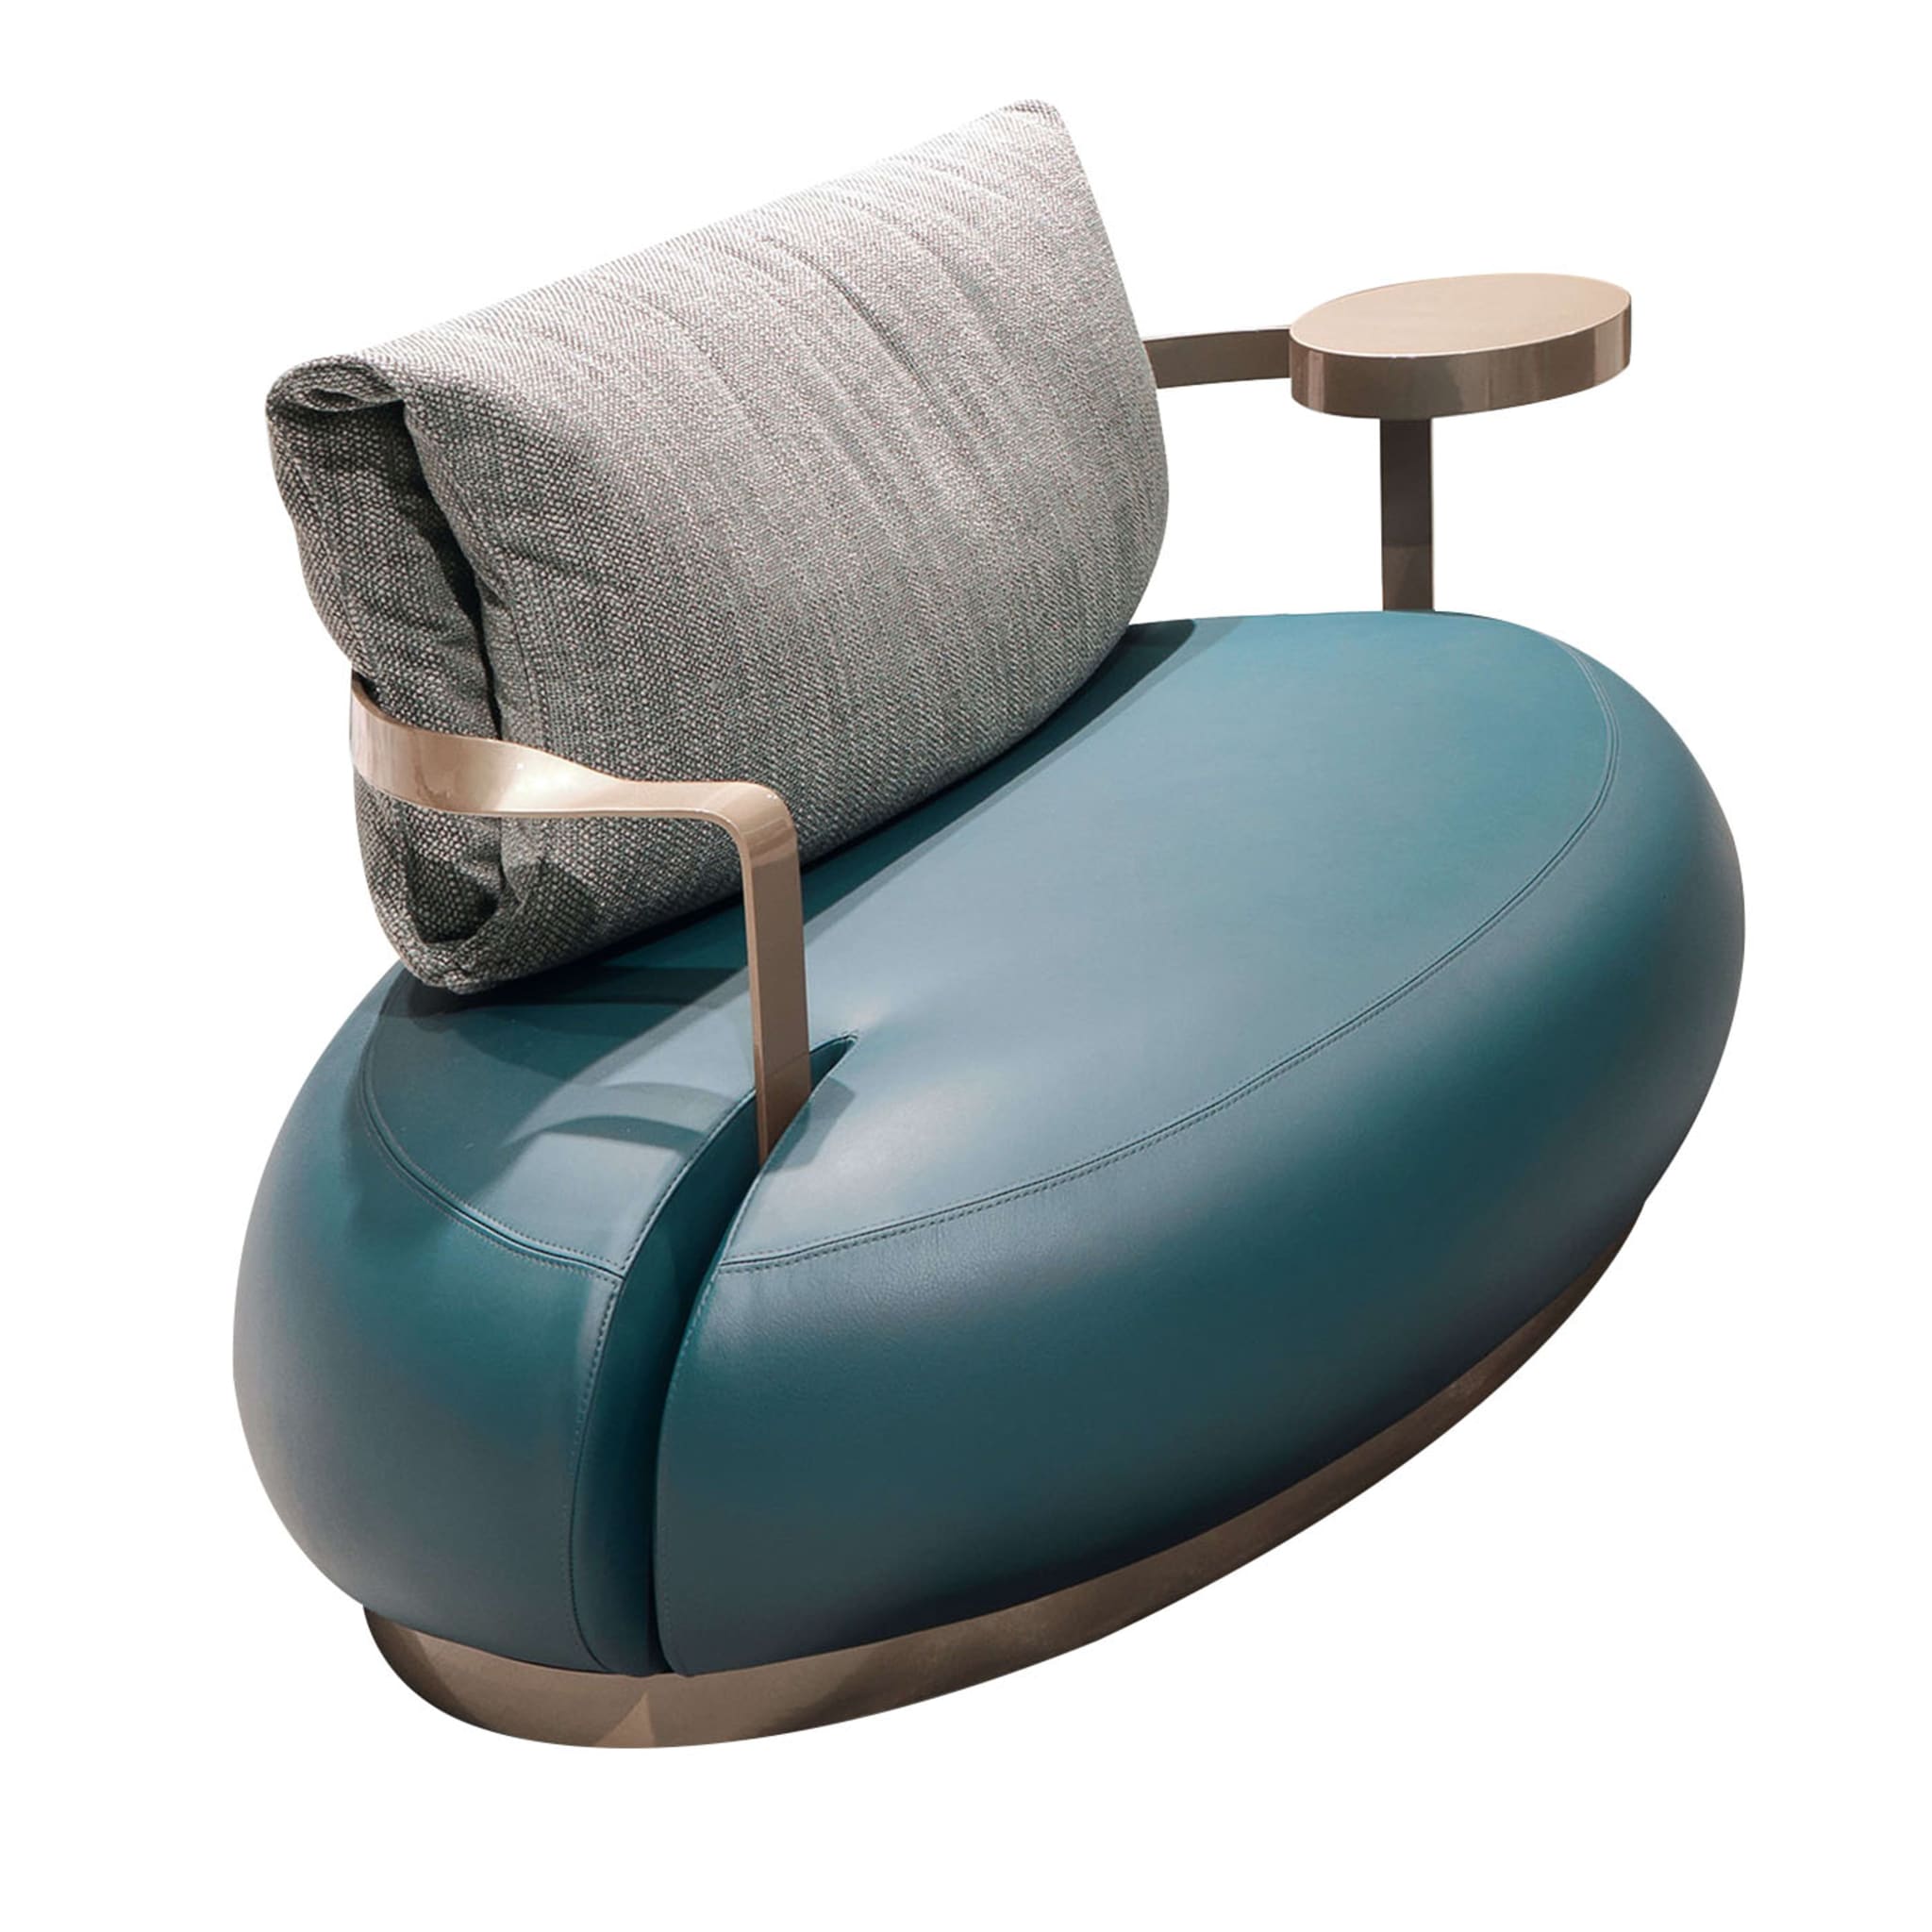 Botero Teal Armchair by Archirivolto #1 - Main view